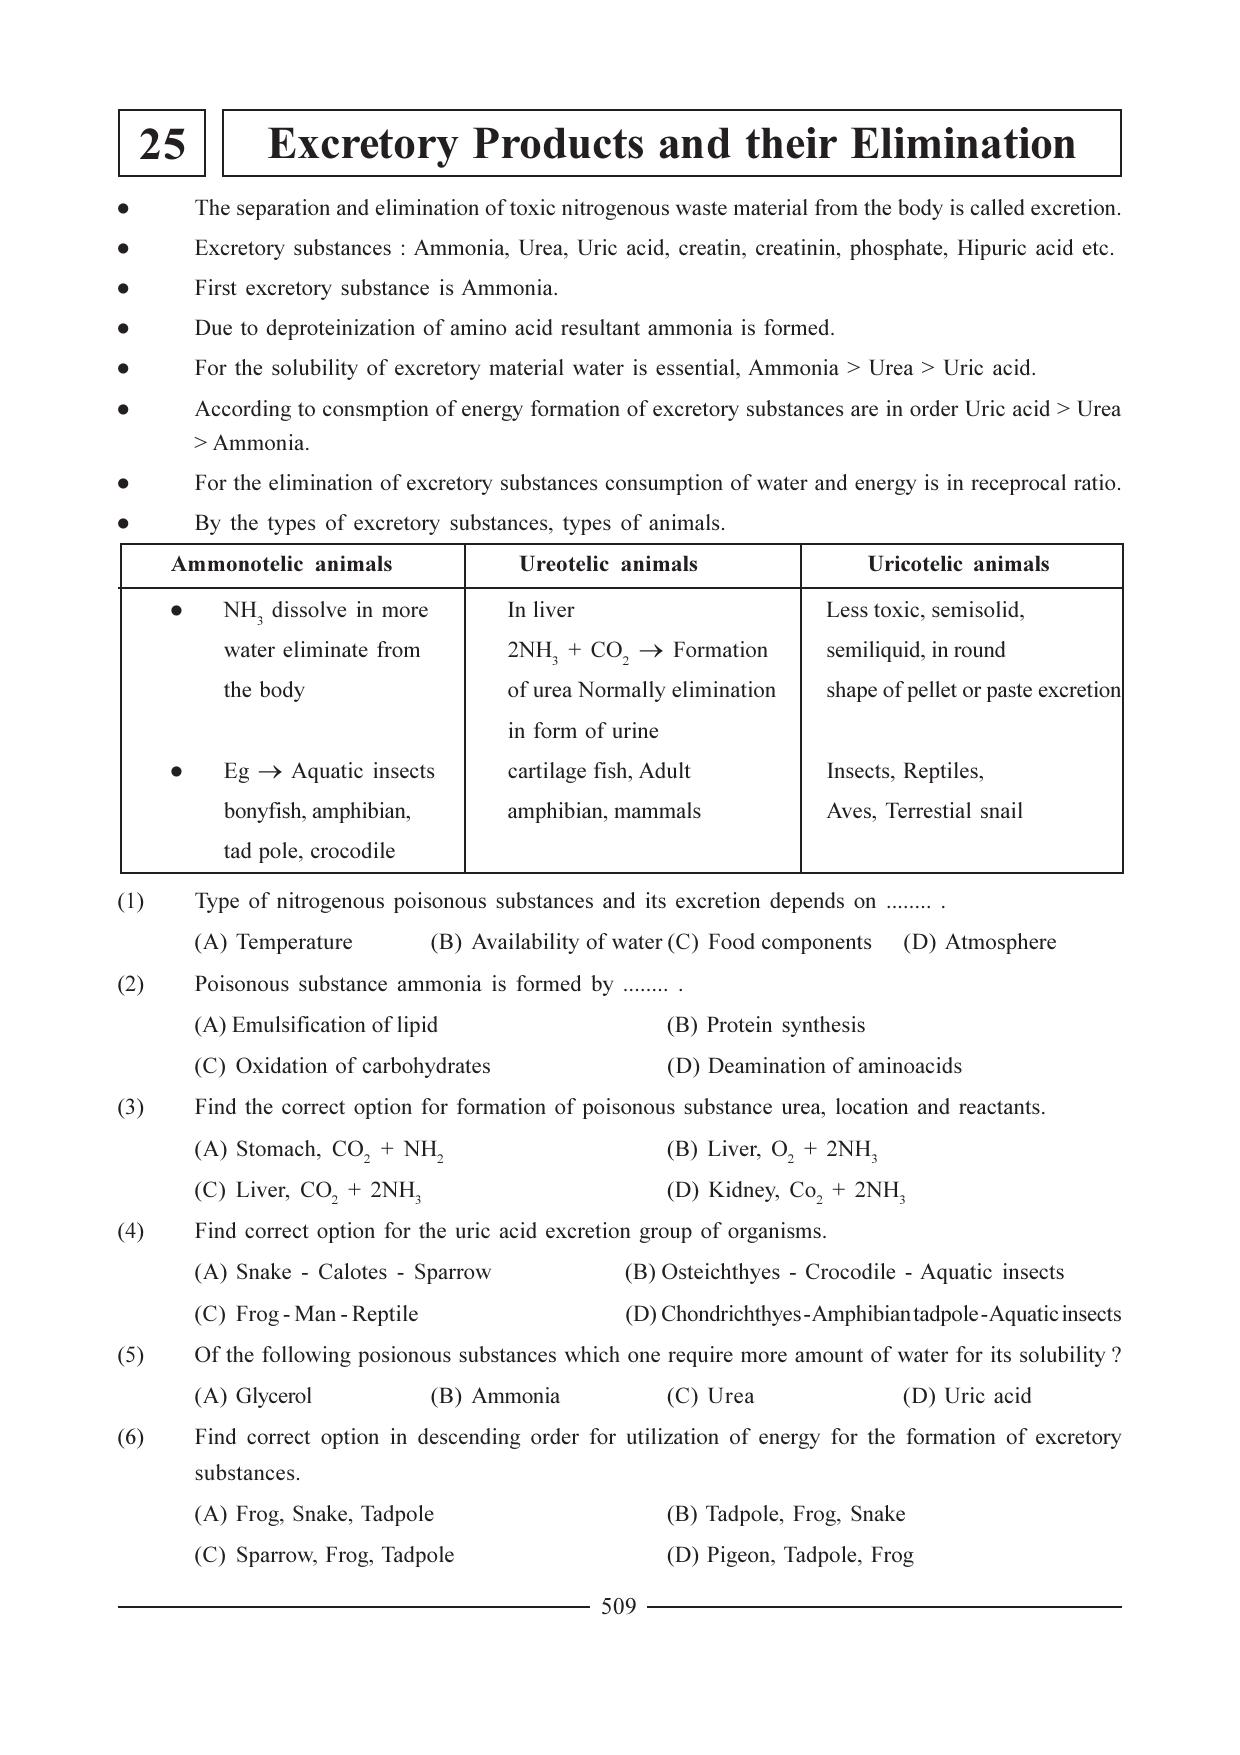 GSEB HSC Biology Question Paper (English Medium)- Chapter 25 - Page 1